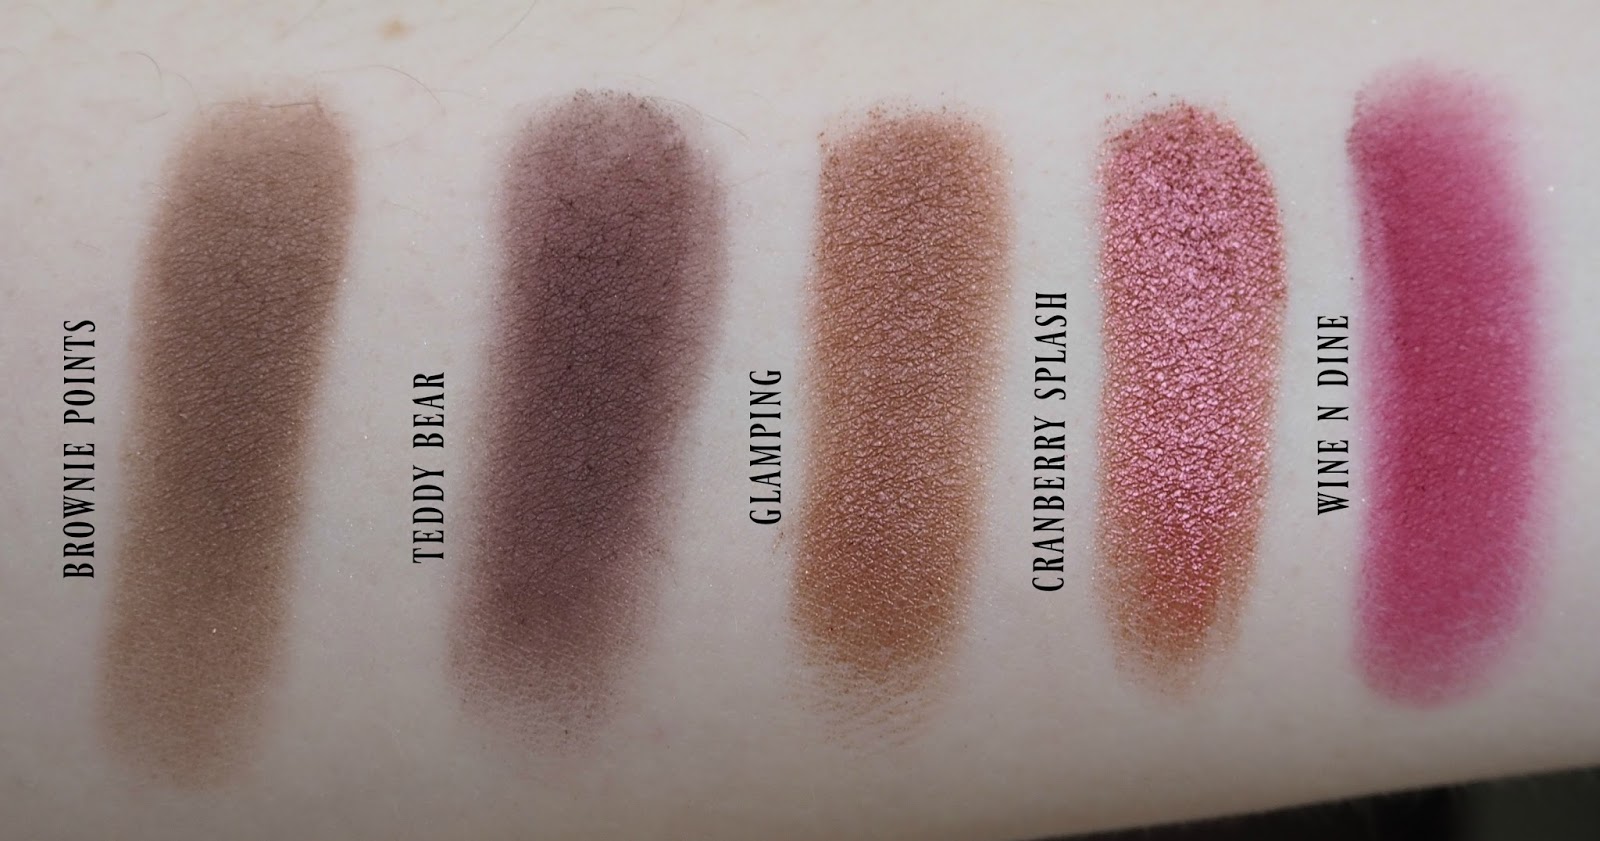 Violet Voss Holy Grail palette review